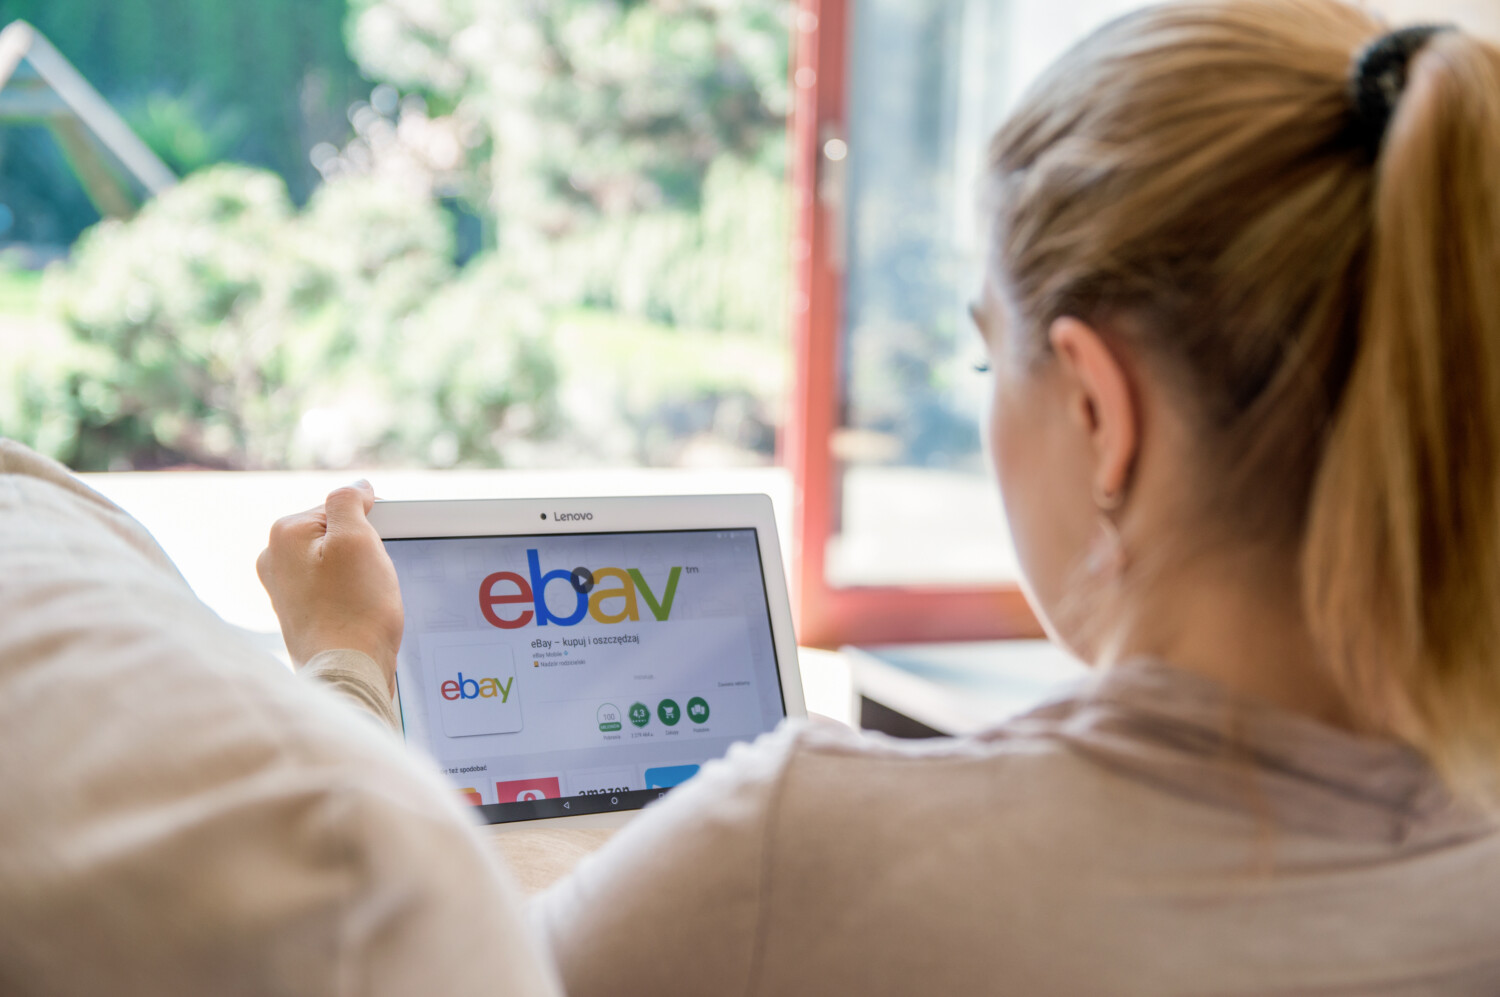 Woman looks at eBay on tablet